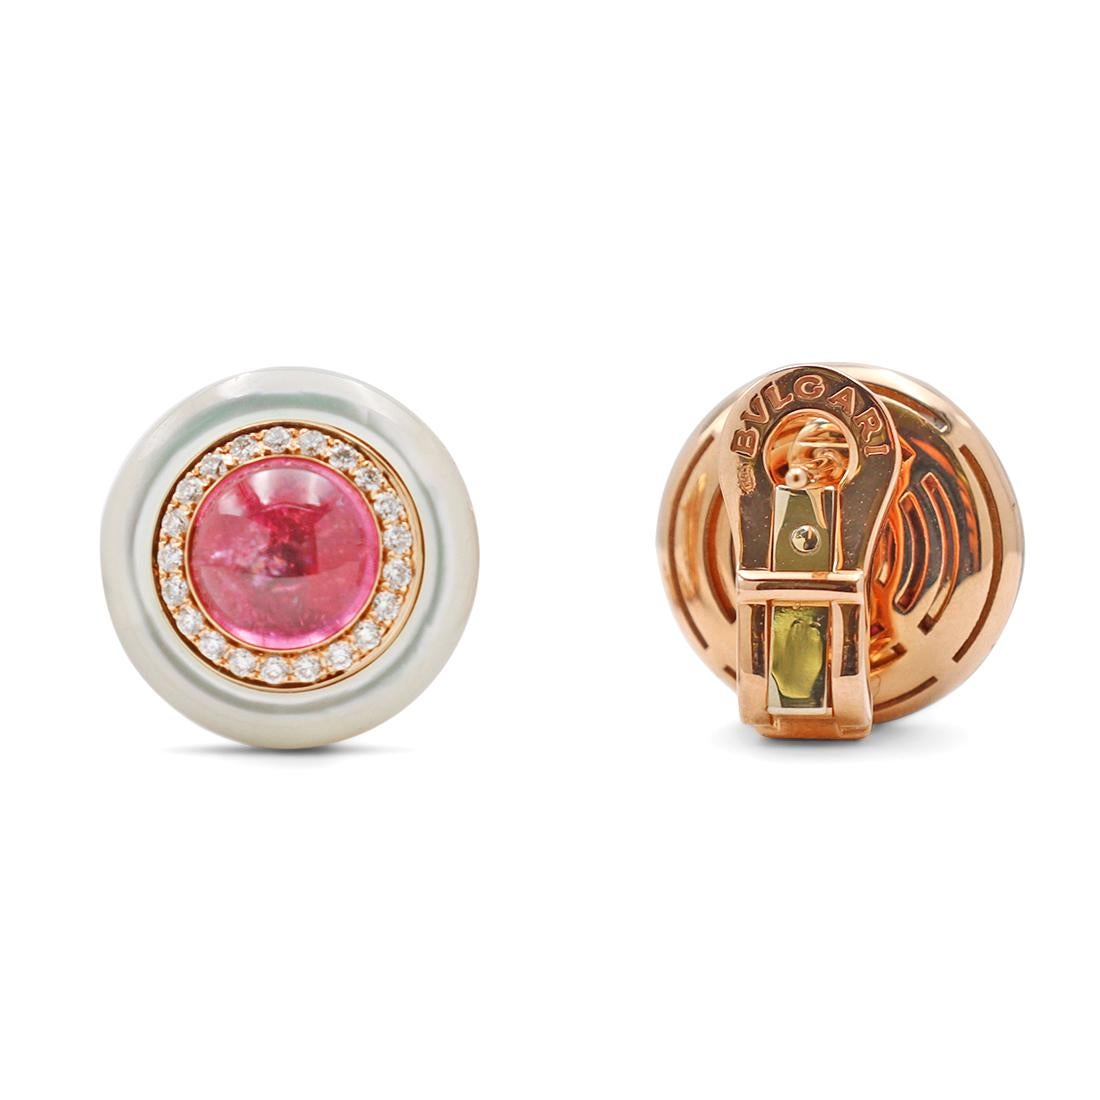 Brilliant Cut Bvlgari Mother of Pearl, Diamond, and Pink Tourmaline Earrings